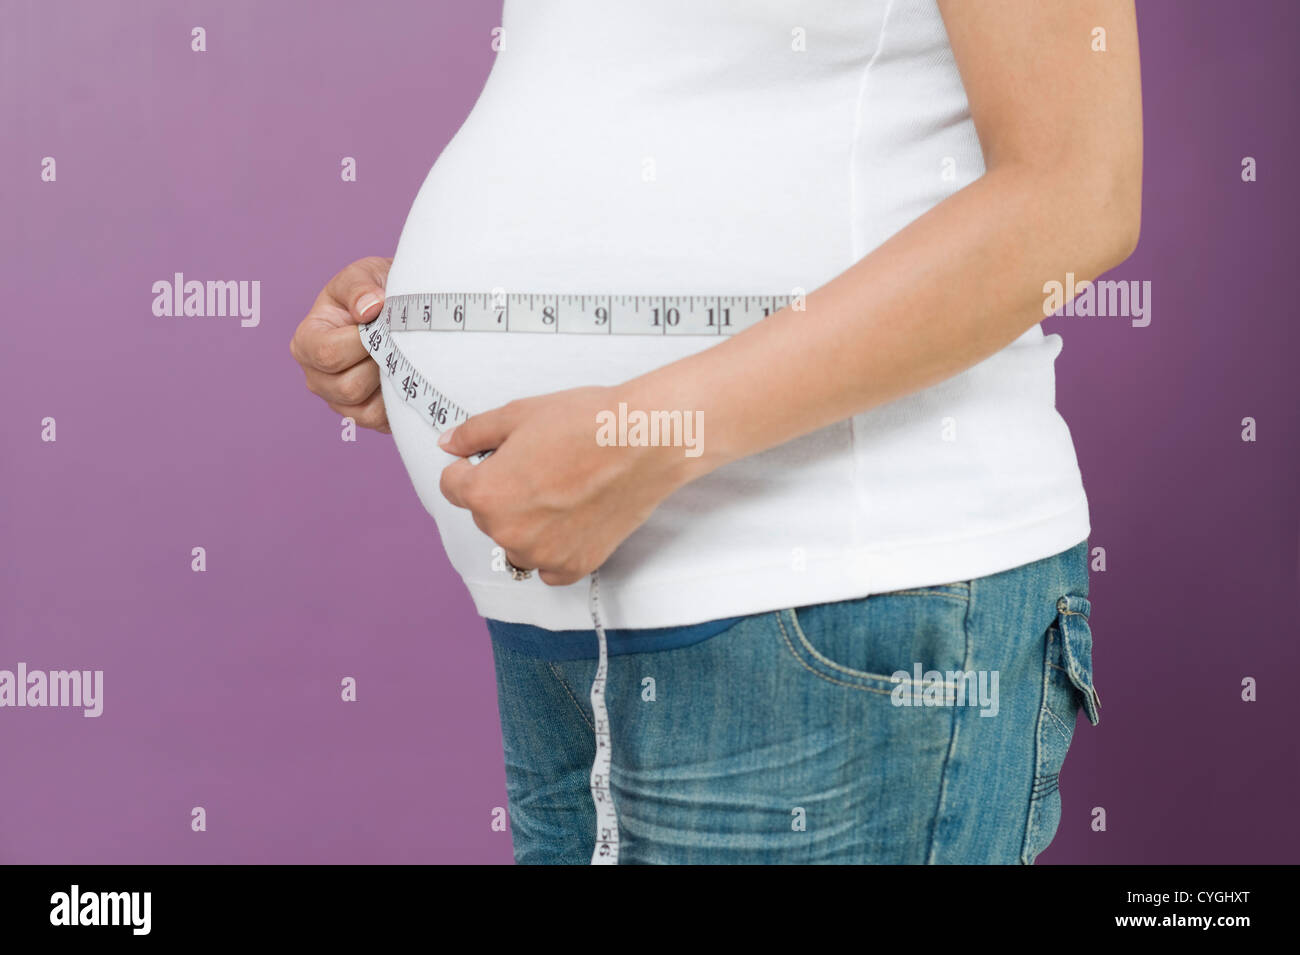 Pregnant woman measuring her abdomen with a tape measure Stock Photo